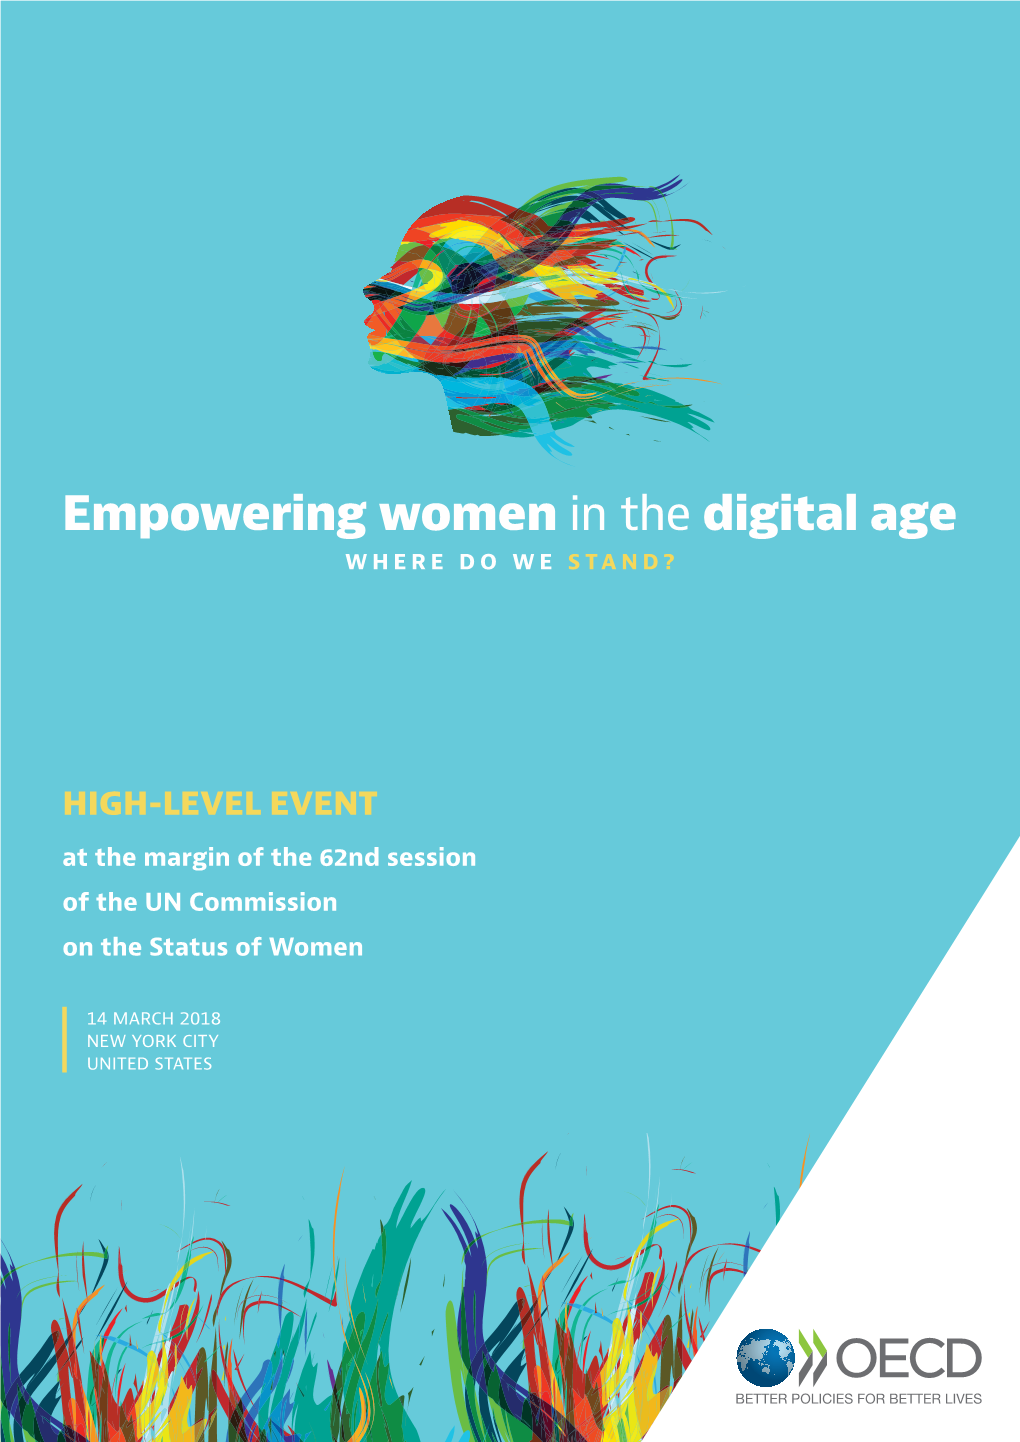 Empowering Women in the Digital Age WHERE DO WE STAND?